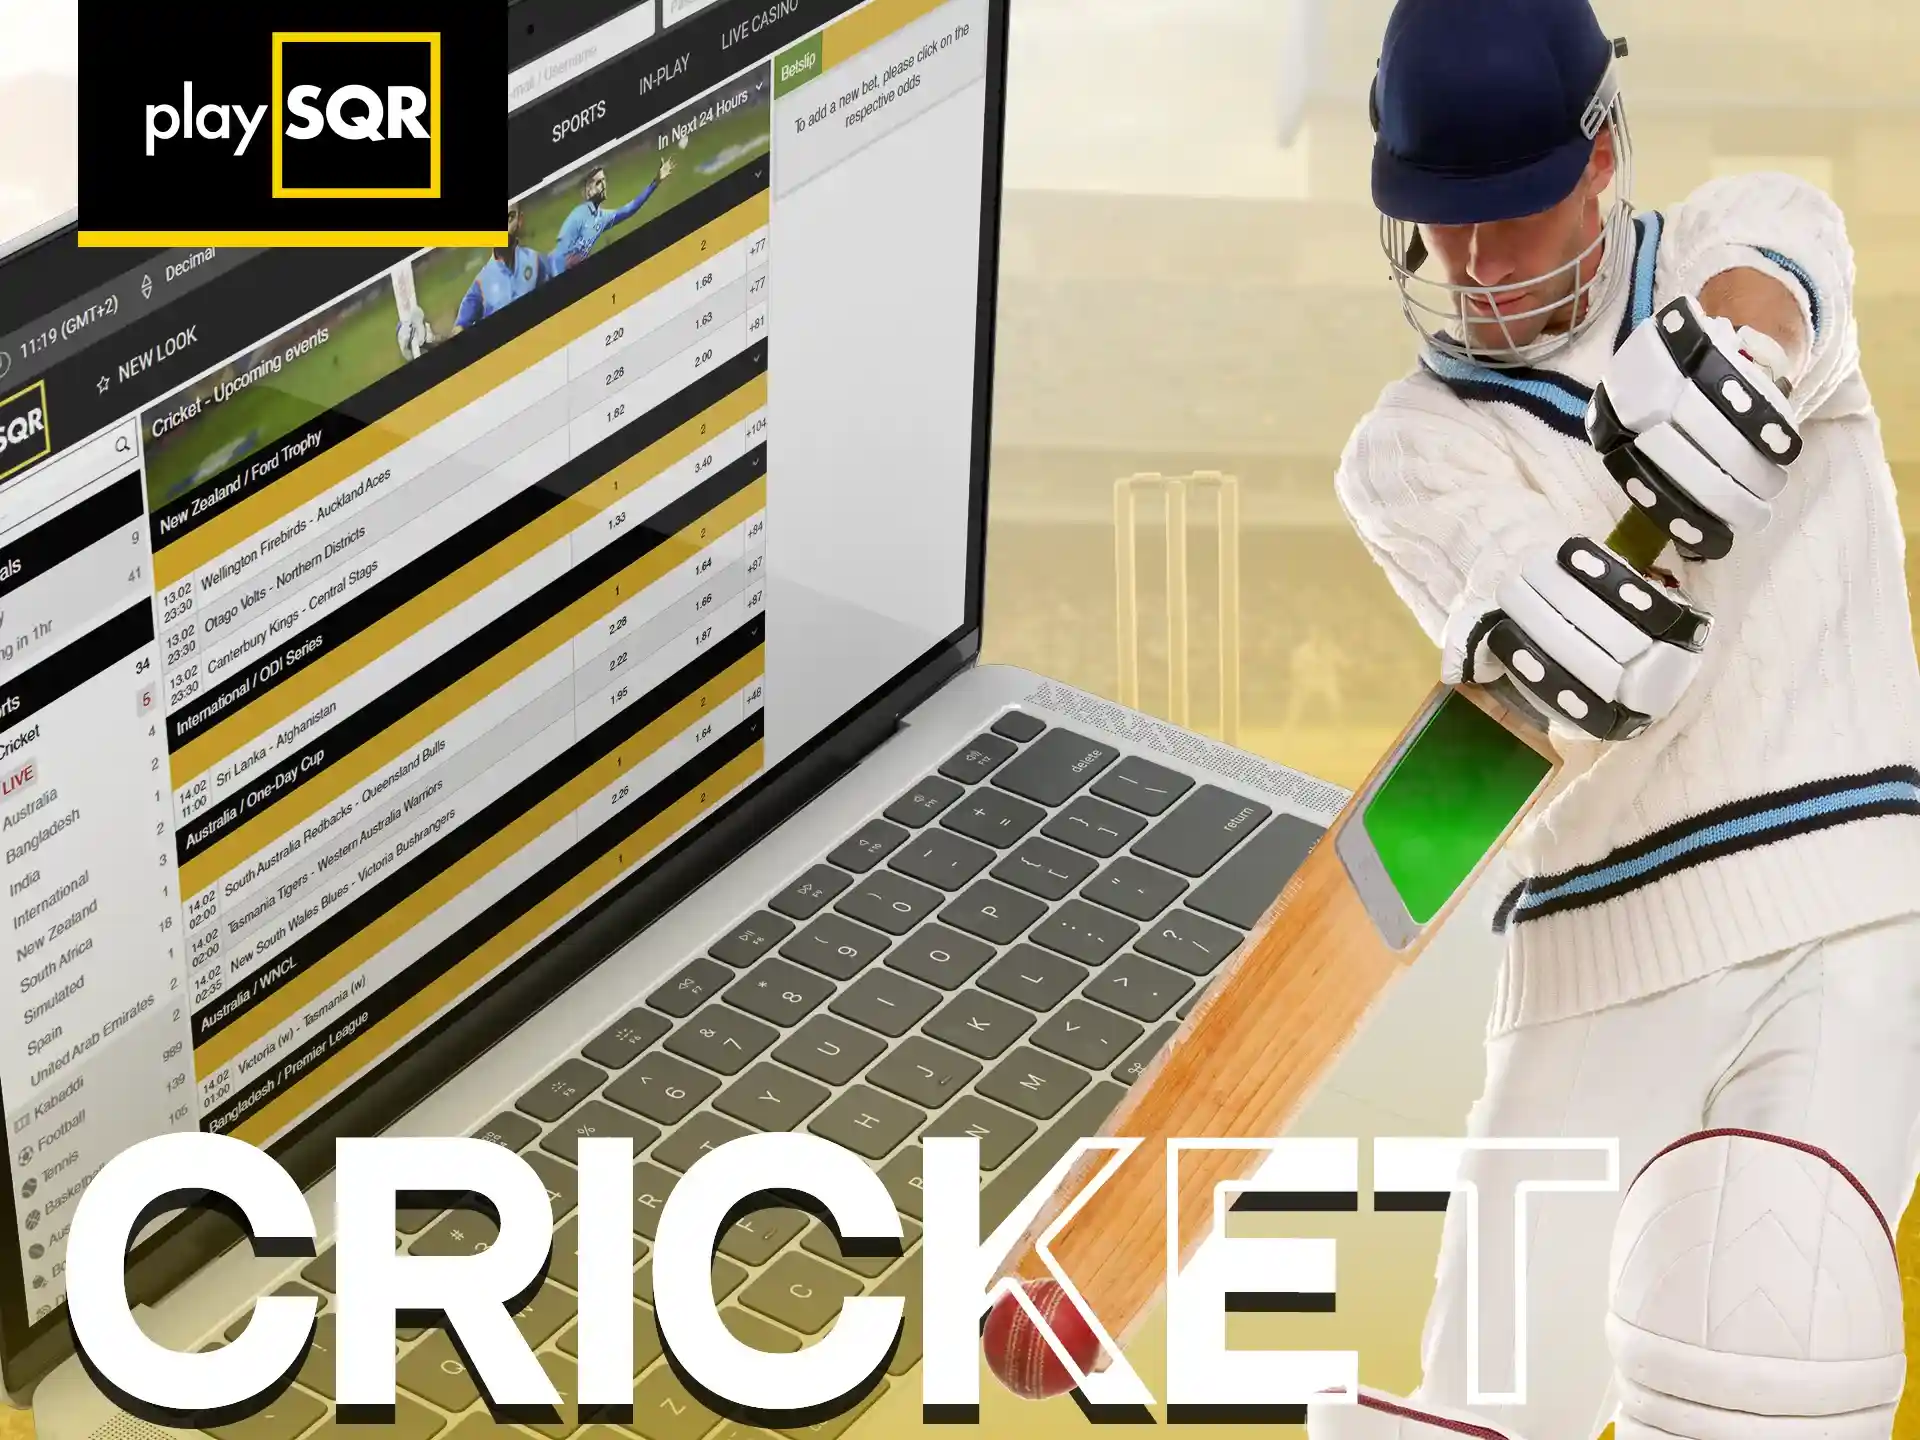 You can bet on cricket on the PlaySQR website and app.